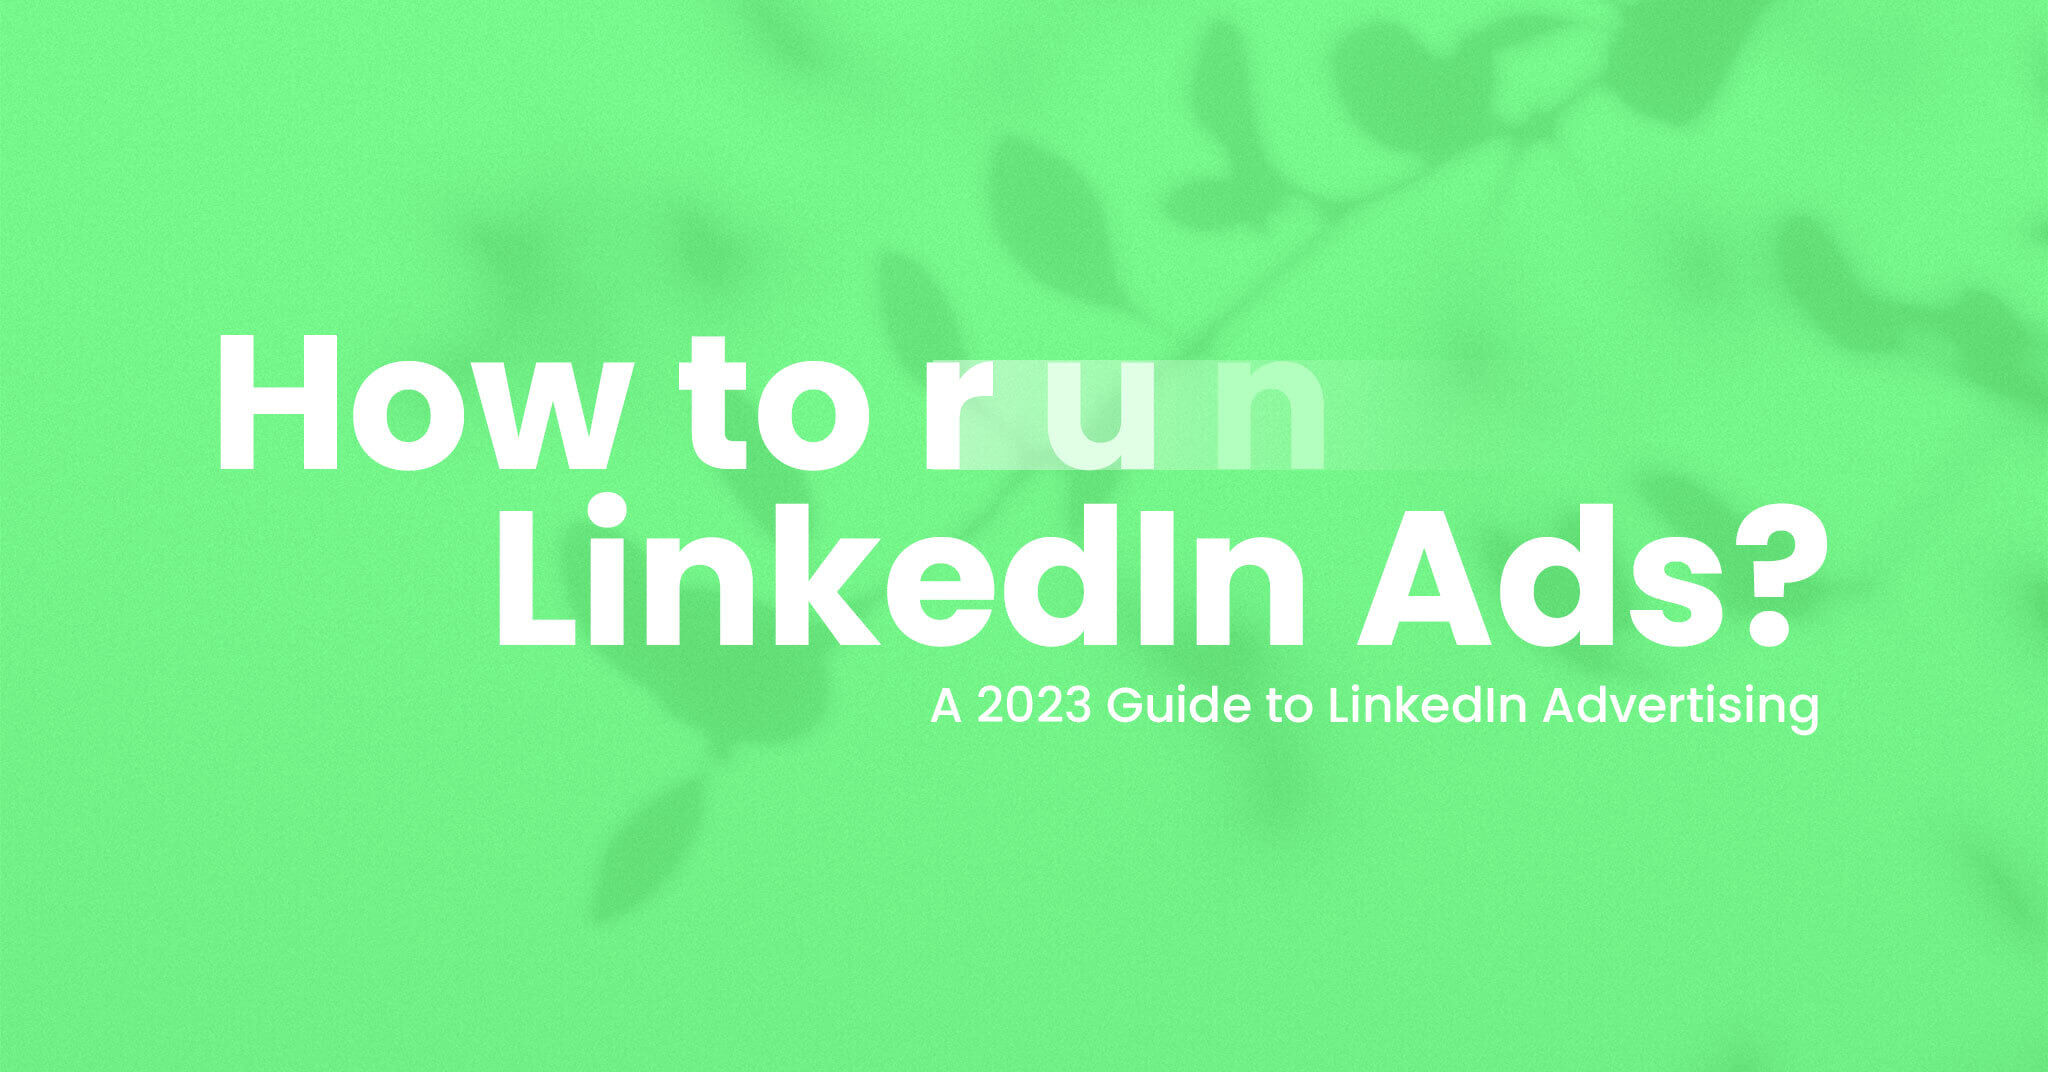 How to run LinkedIn Ads? A 2023 Guide to LinkedIn Advertising